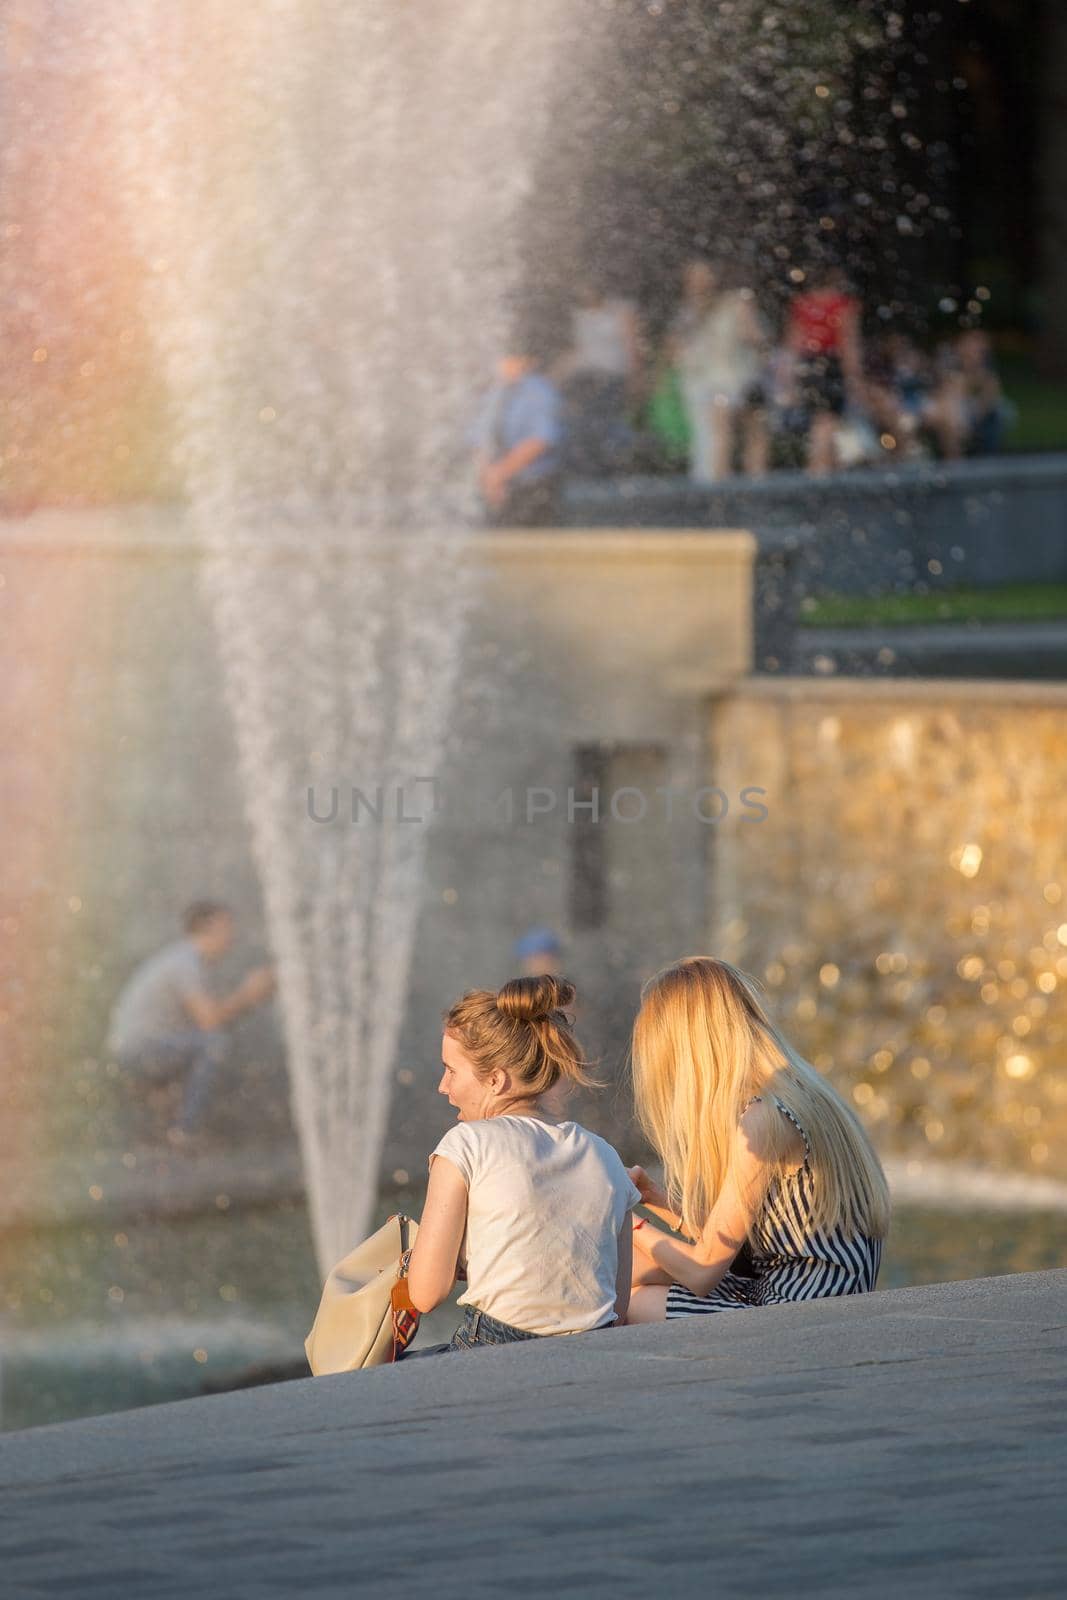 Ukraine. The city of Kharkov. September 10, 2019. Two girls are sitting in a park near the fountain. by Yurii73